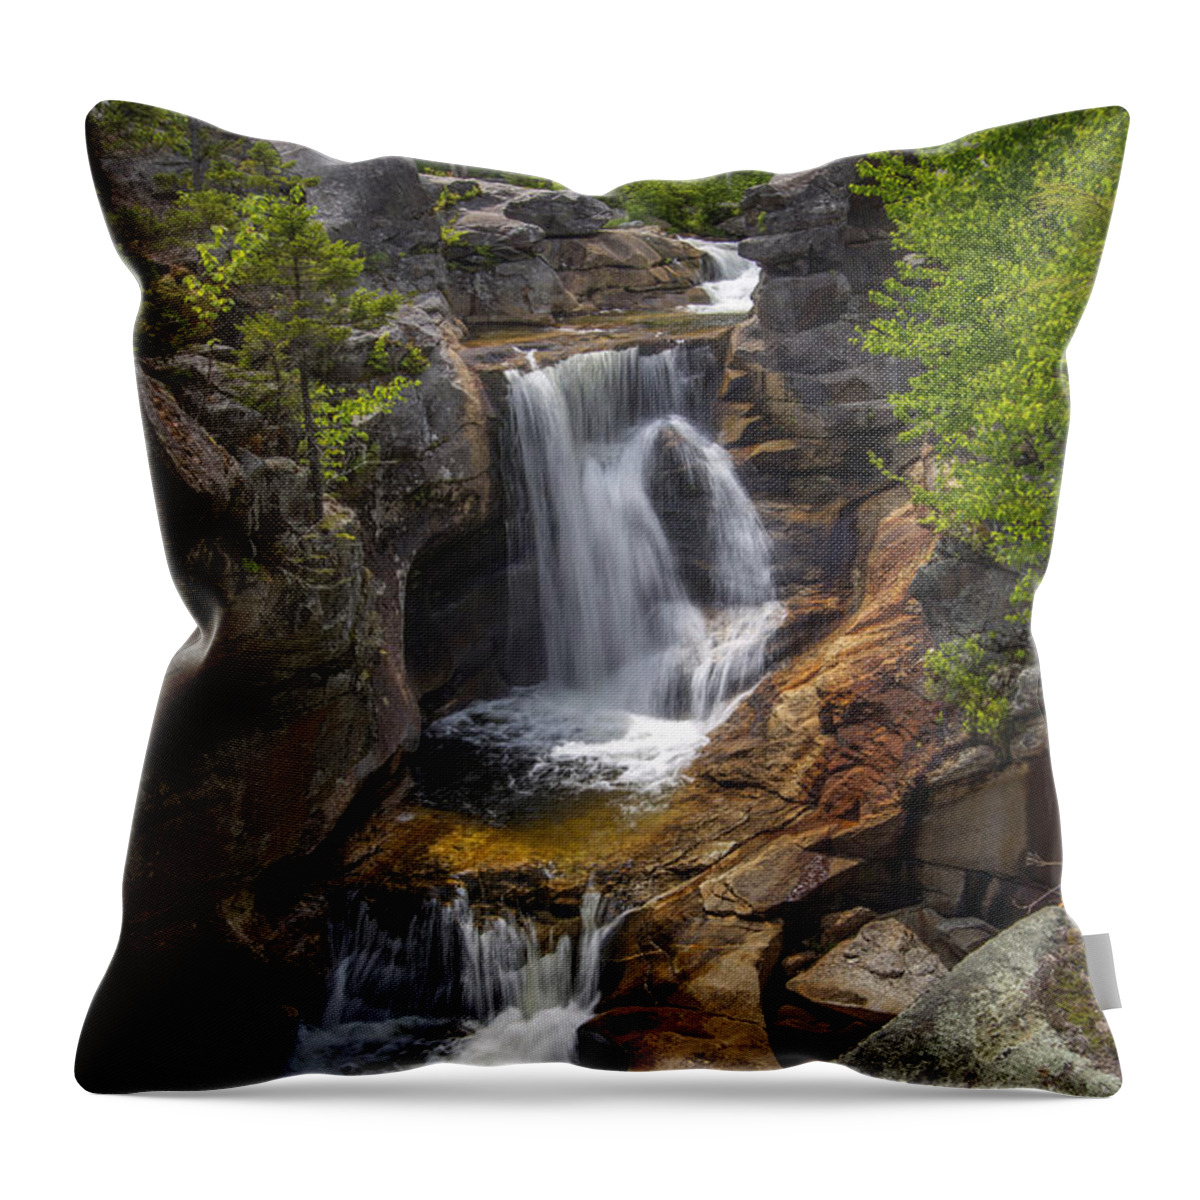 Screw Auger Falls Throw Pillow featuring the photograph Screw Auger Falls by Alana Ranney